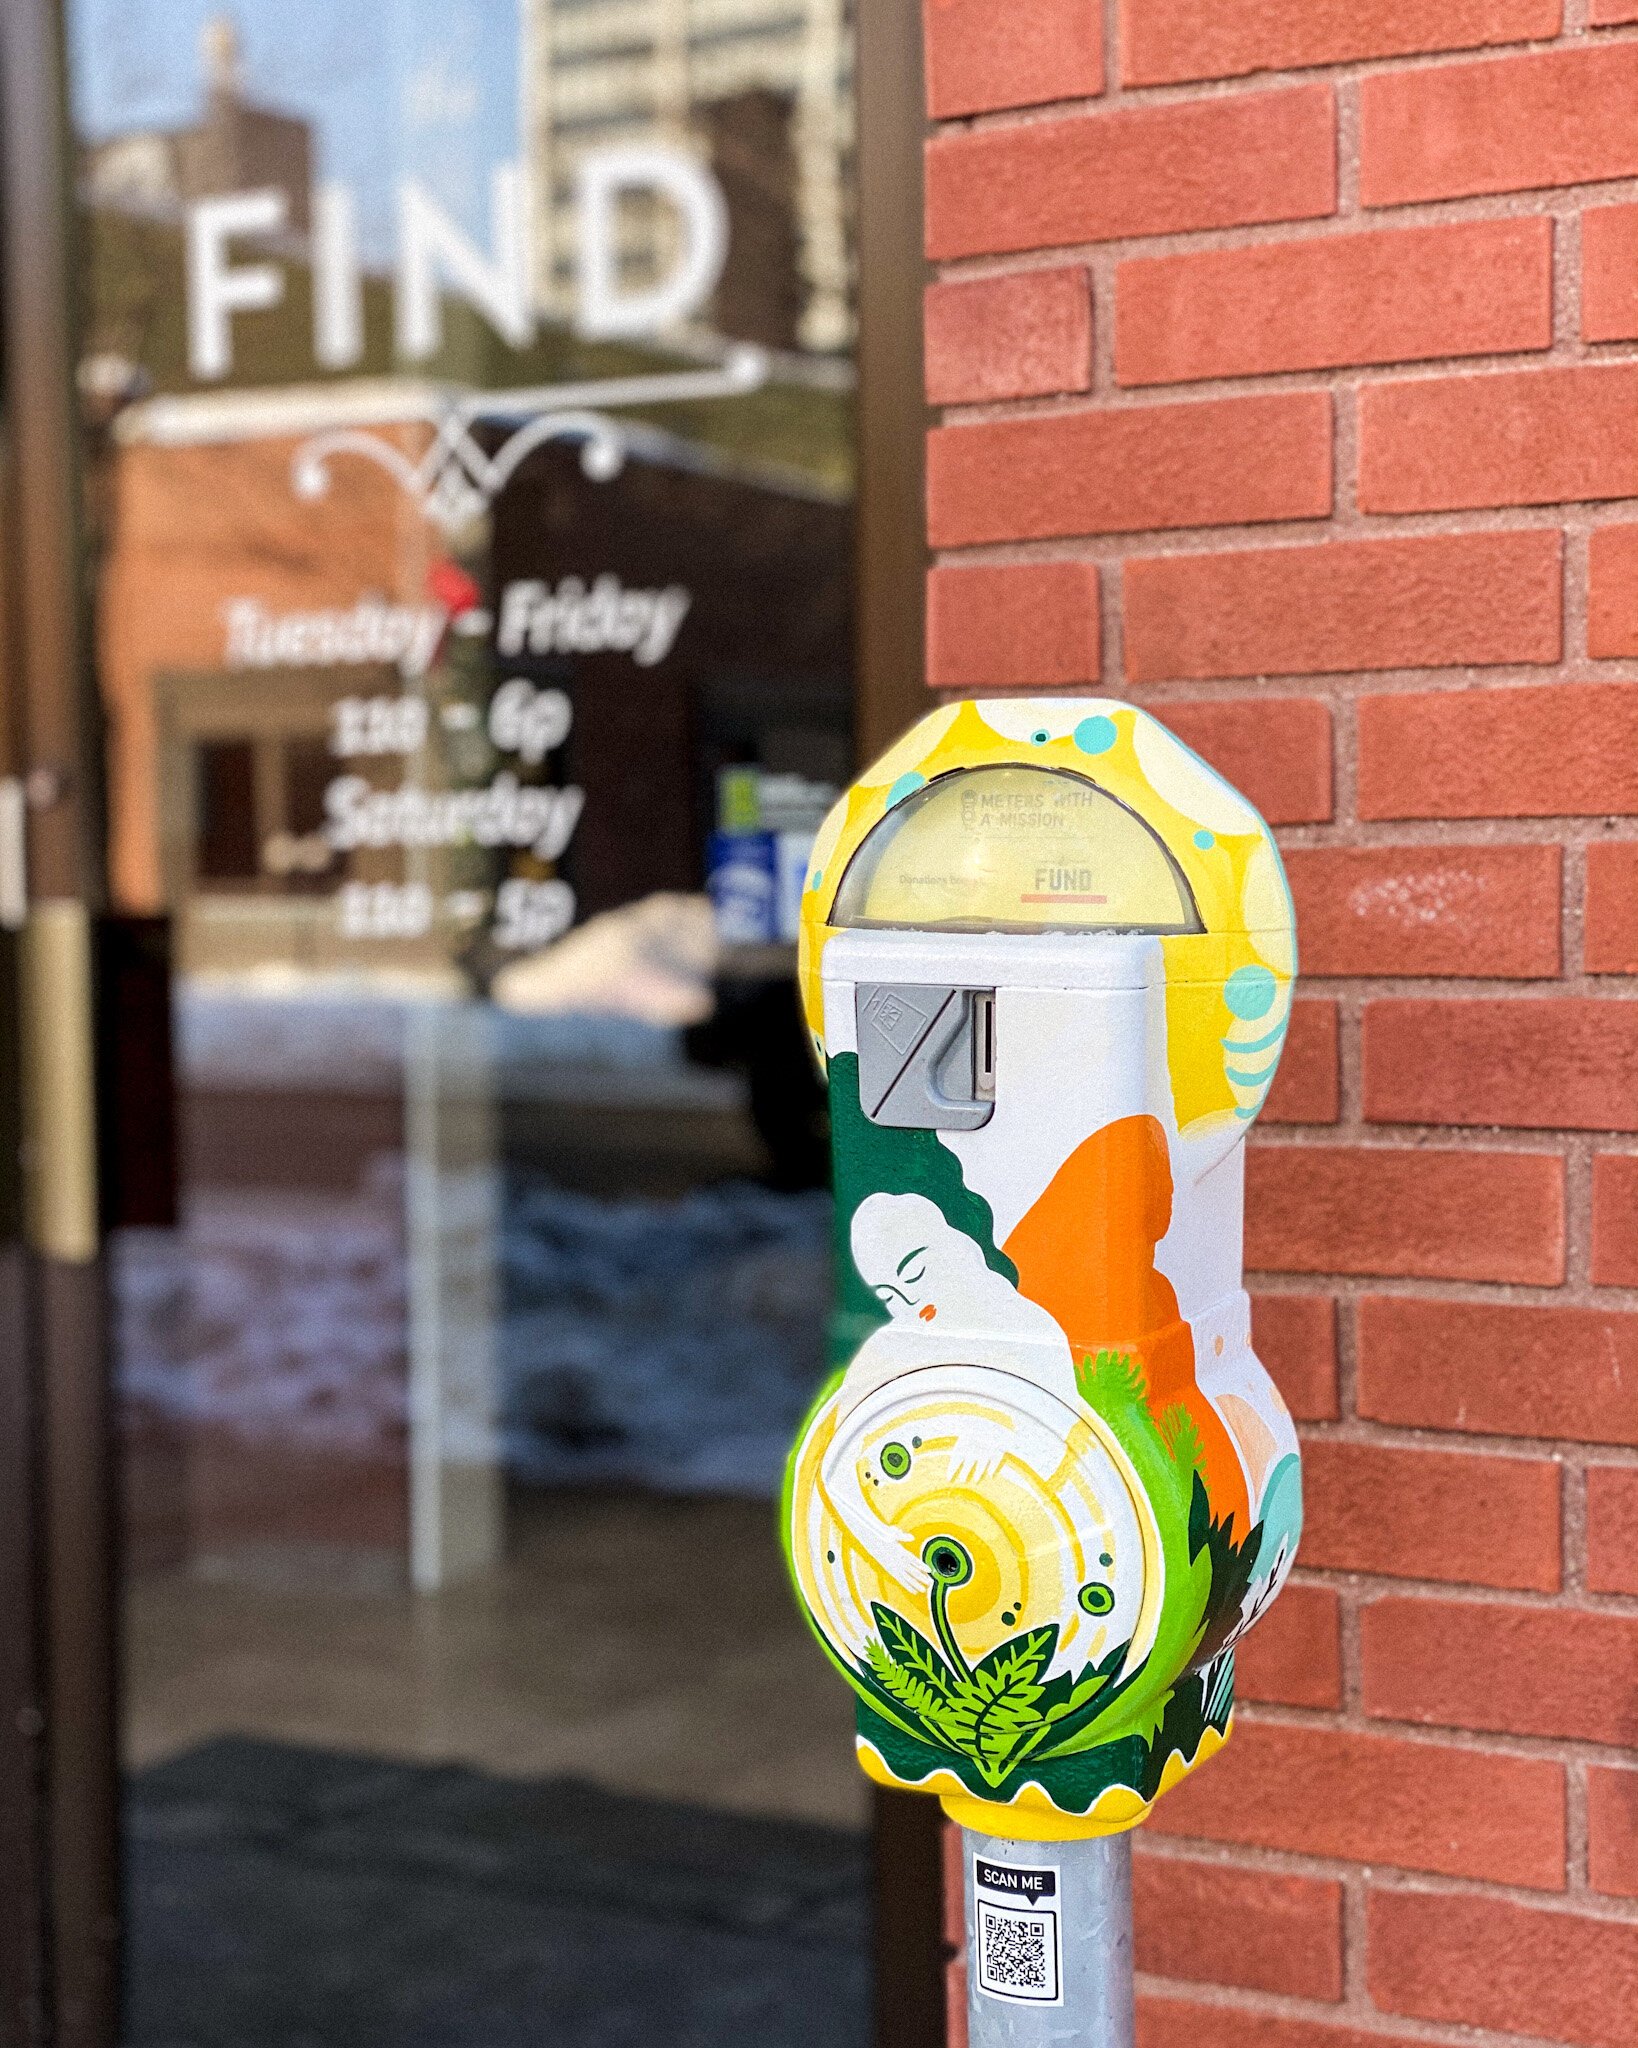 The Find’s meter was designed by local artist Lyndy Bazile of AfroPlump and supports the Family & Friends Fund for Southeast.